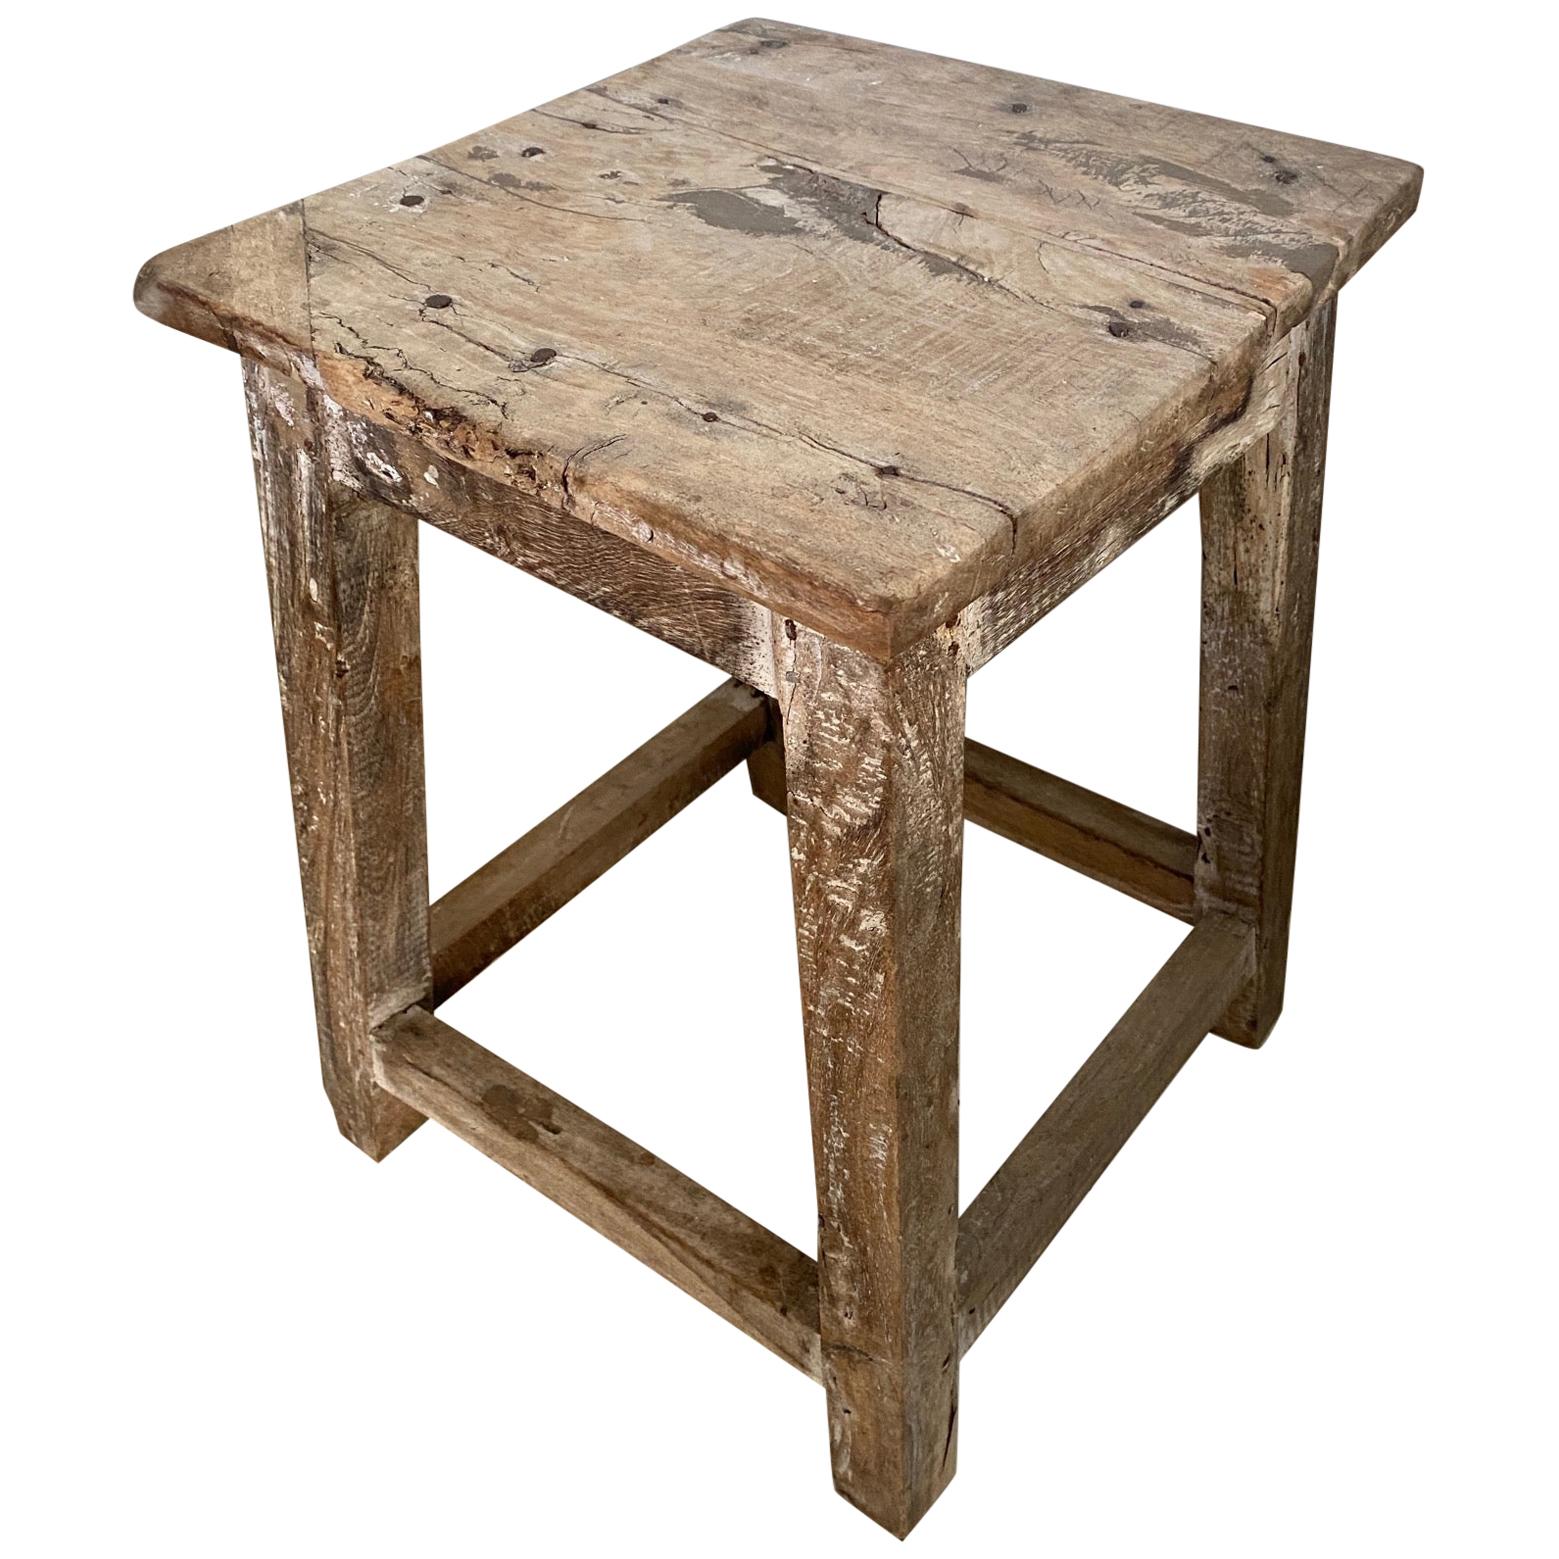 Rustic Antique Chinese Stool or Side Table